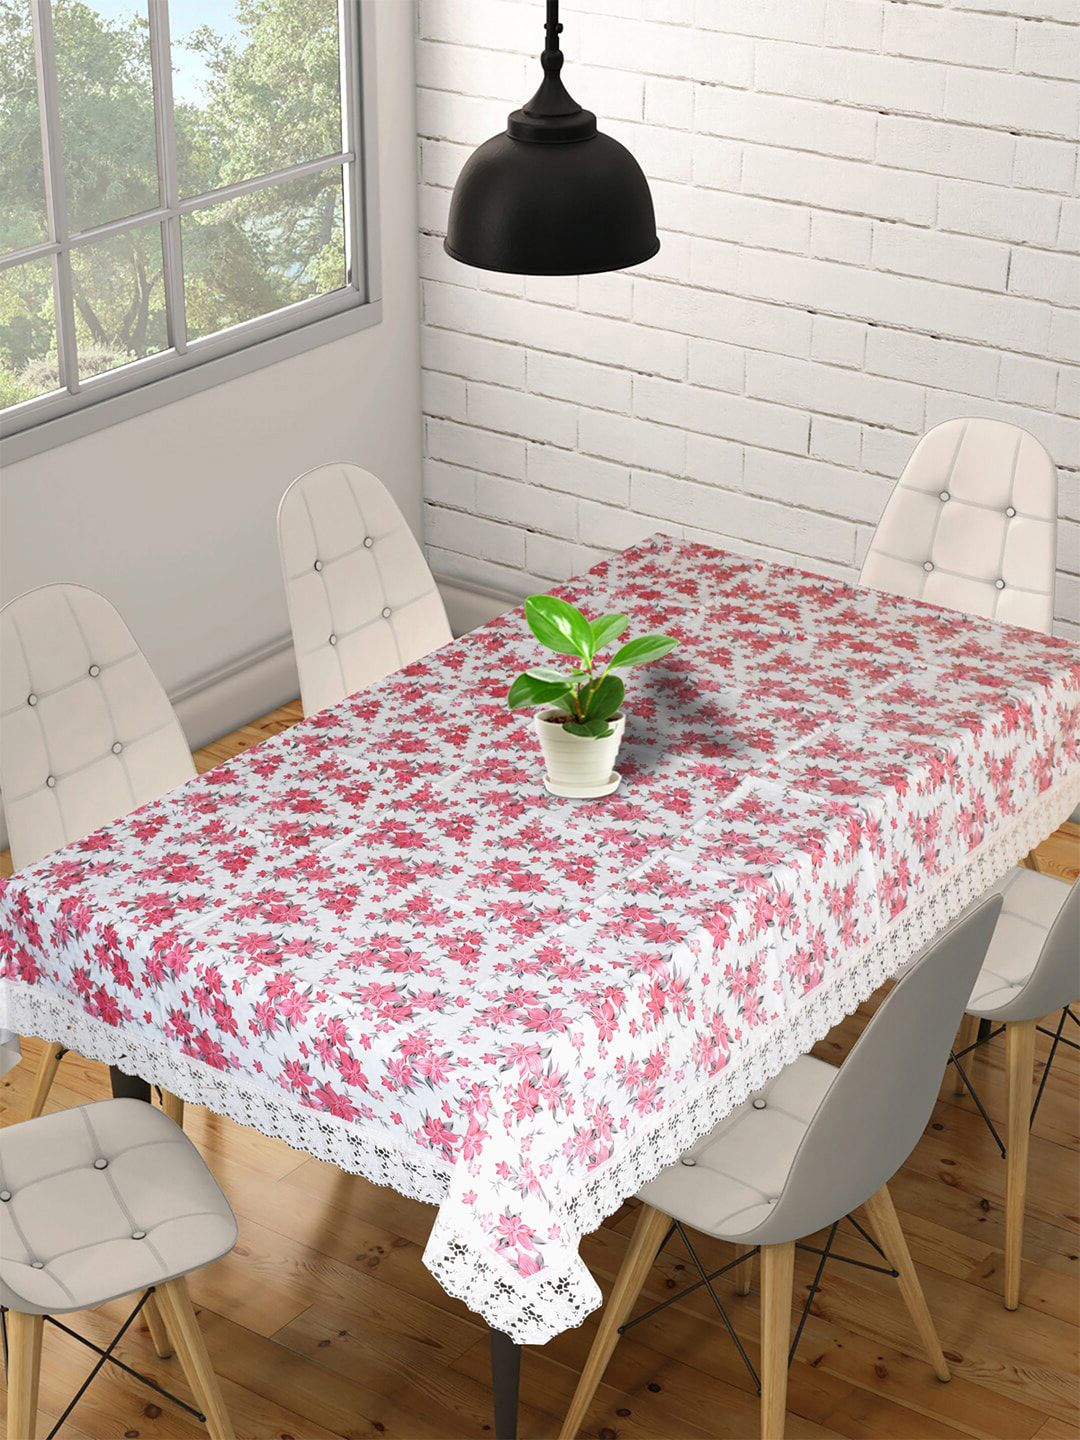 Kuber Industries Cream & Pink Floral Printed Table Cover Price in India